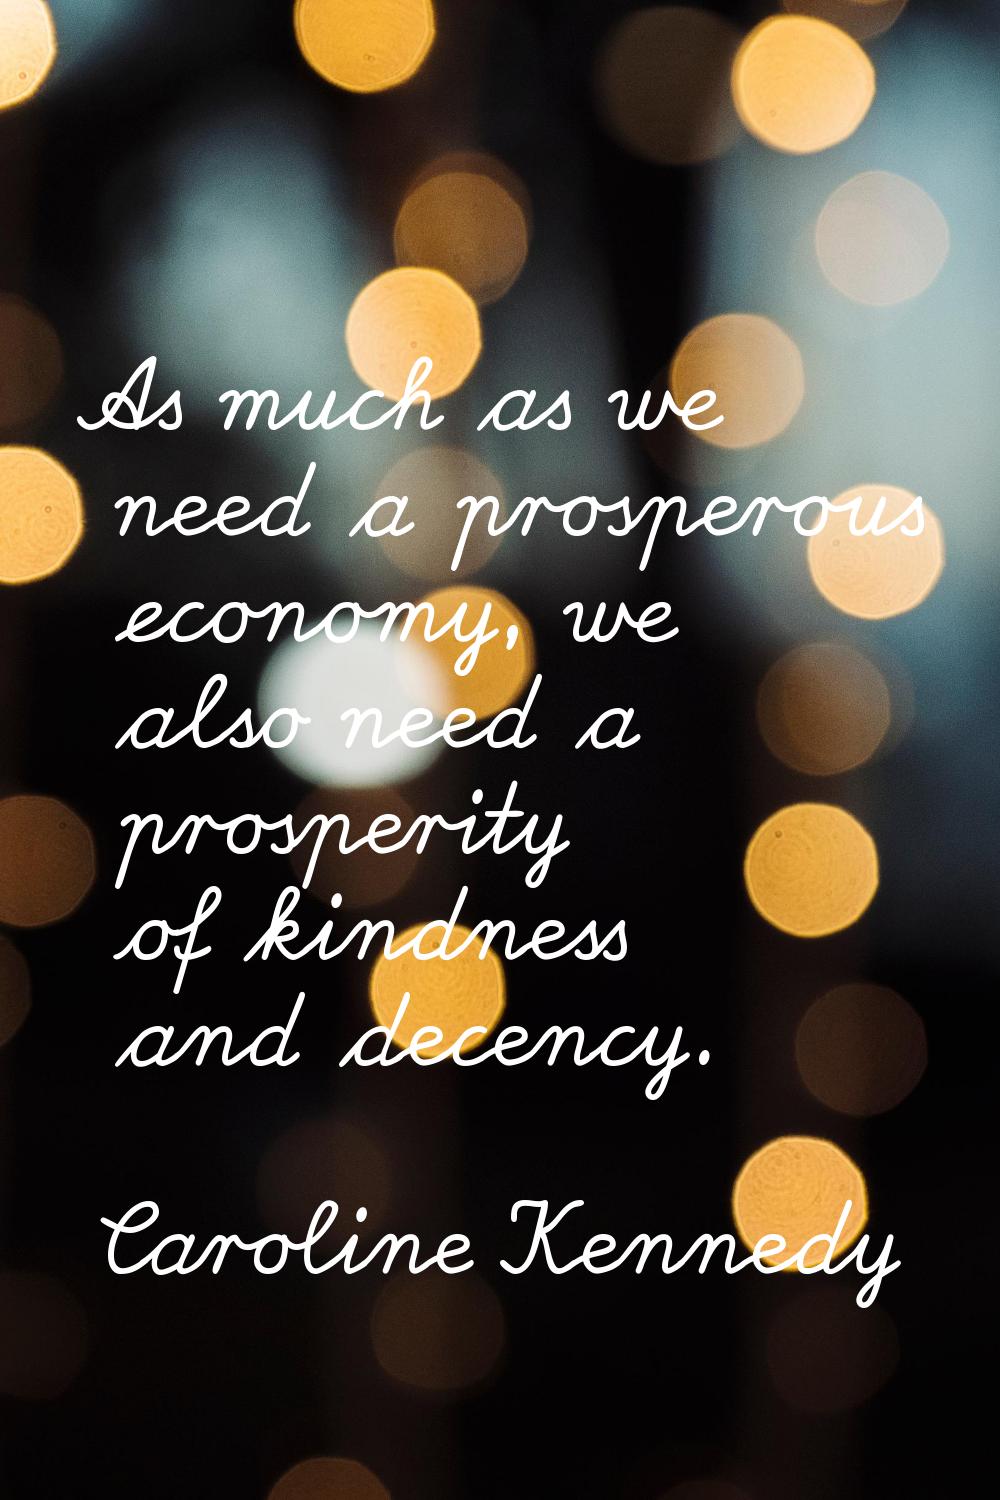 As much as we need a prosperous economy, we also need a prosperity of kindness and decency.